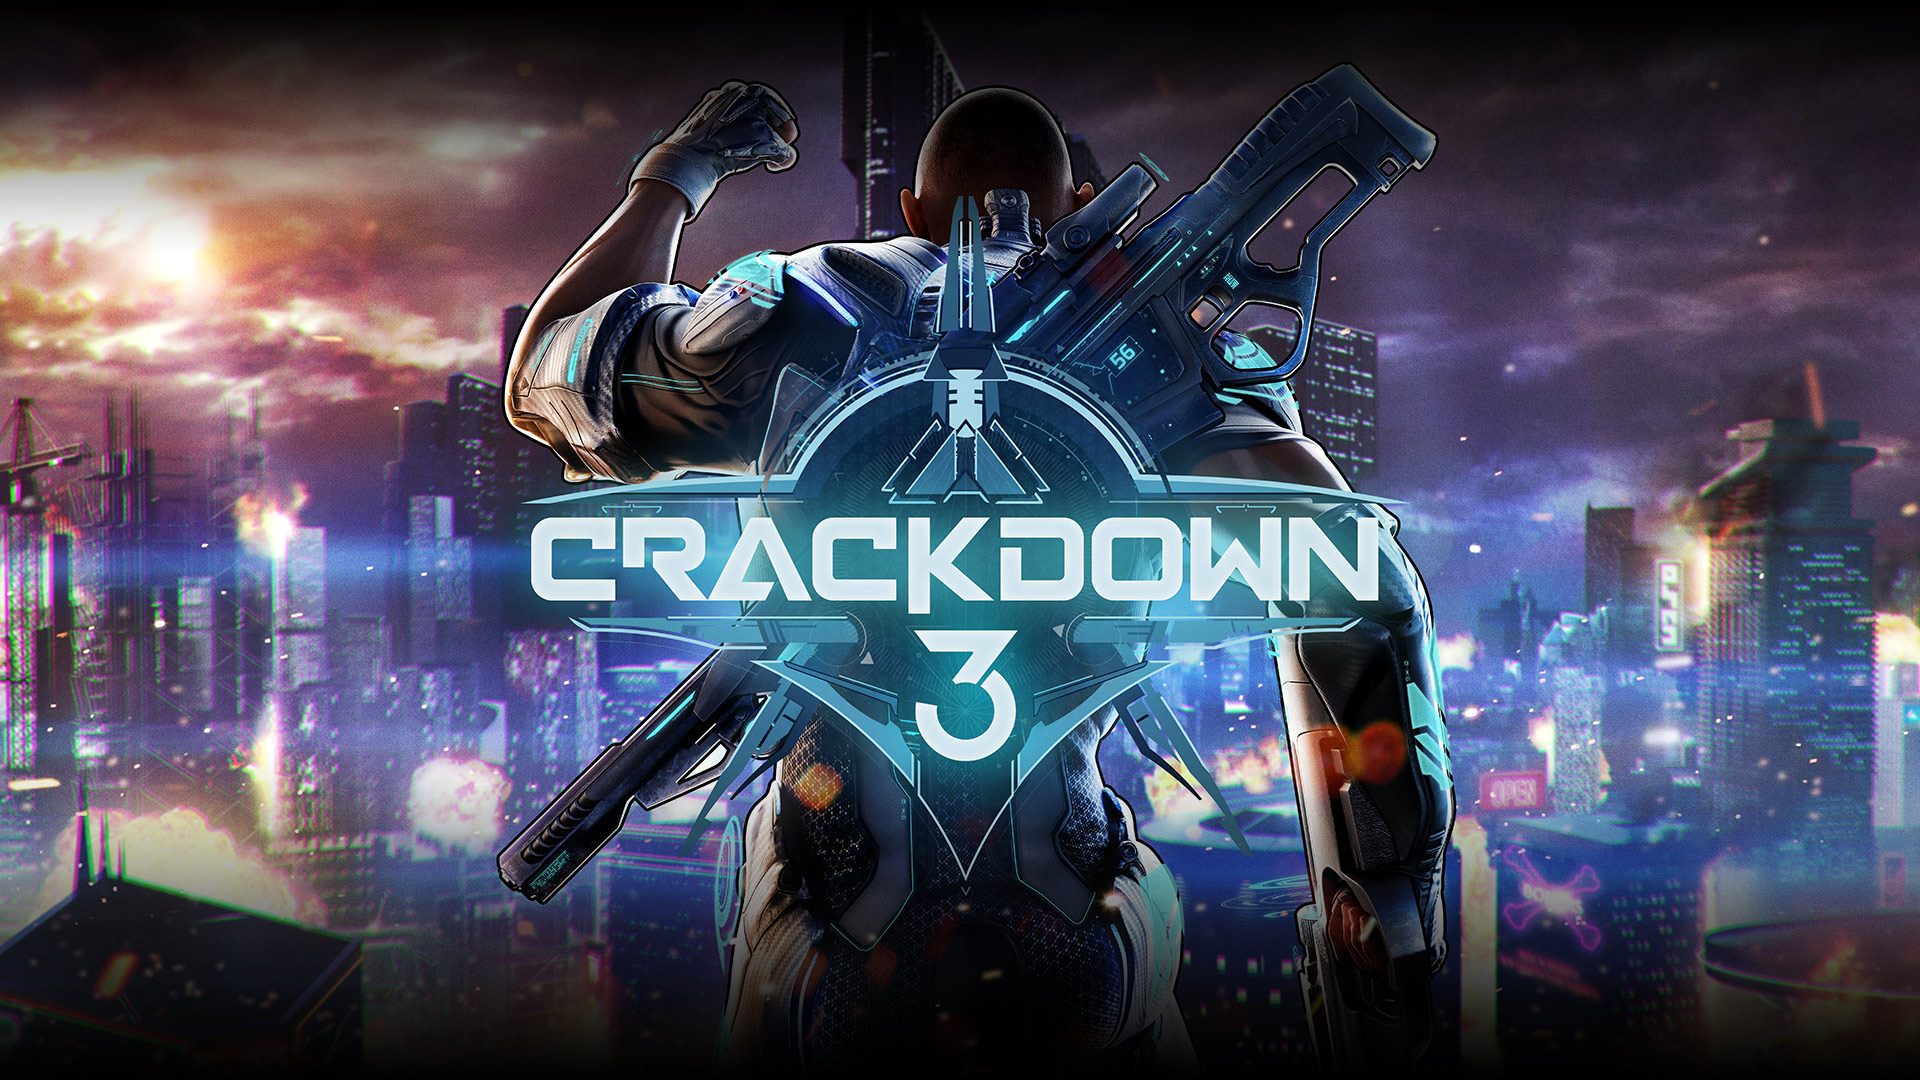 download crackdown 2 steam for free